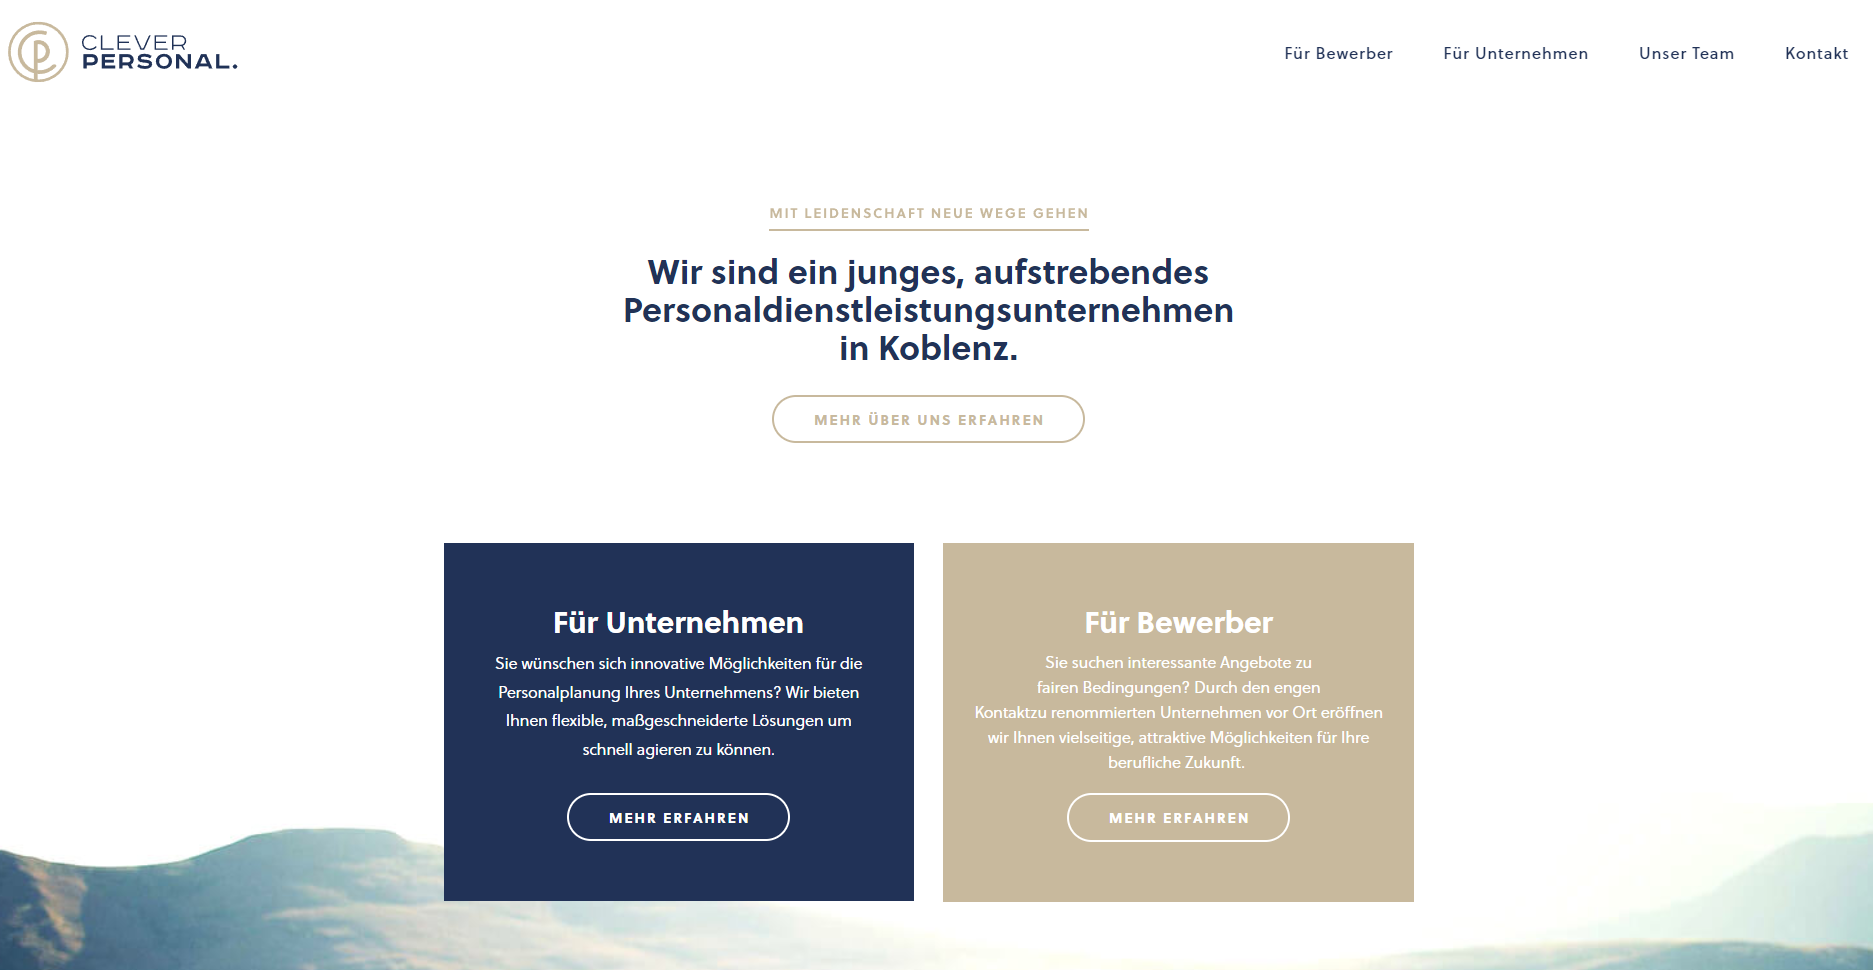 CLEVER Personal GmbH